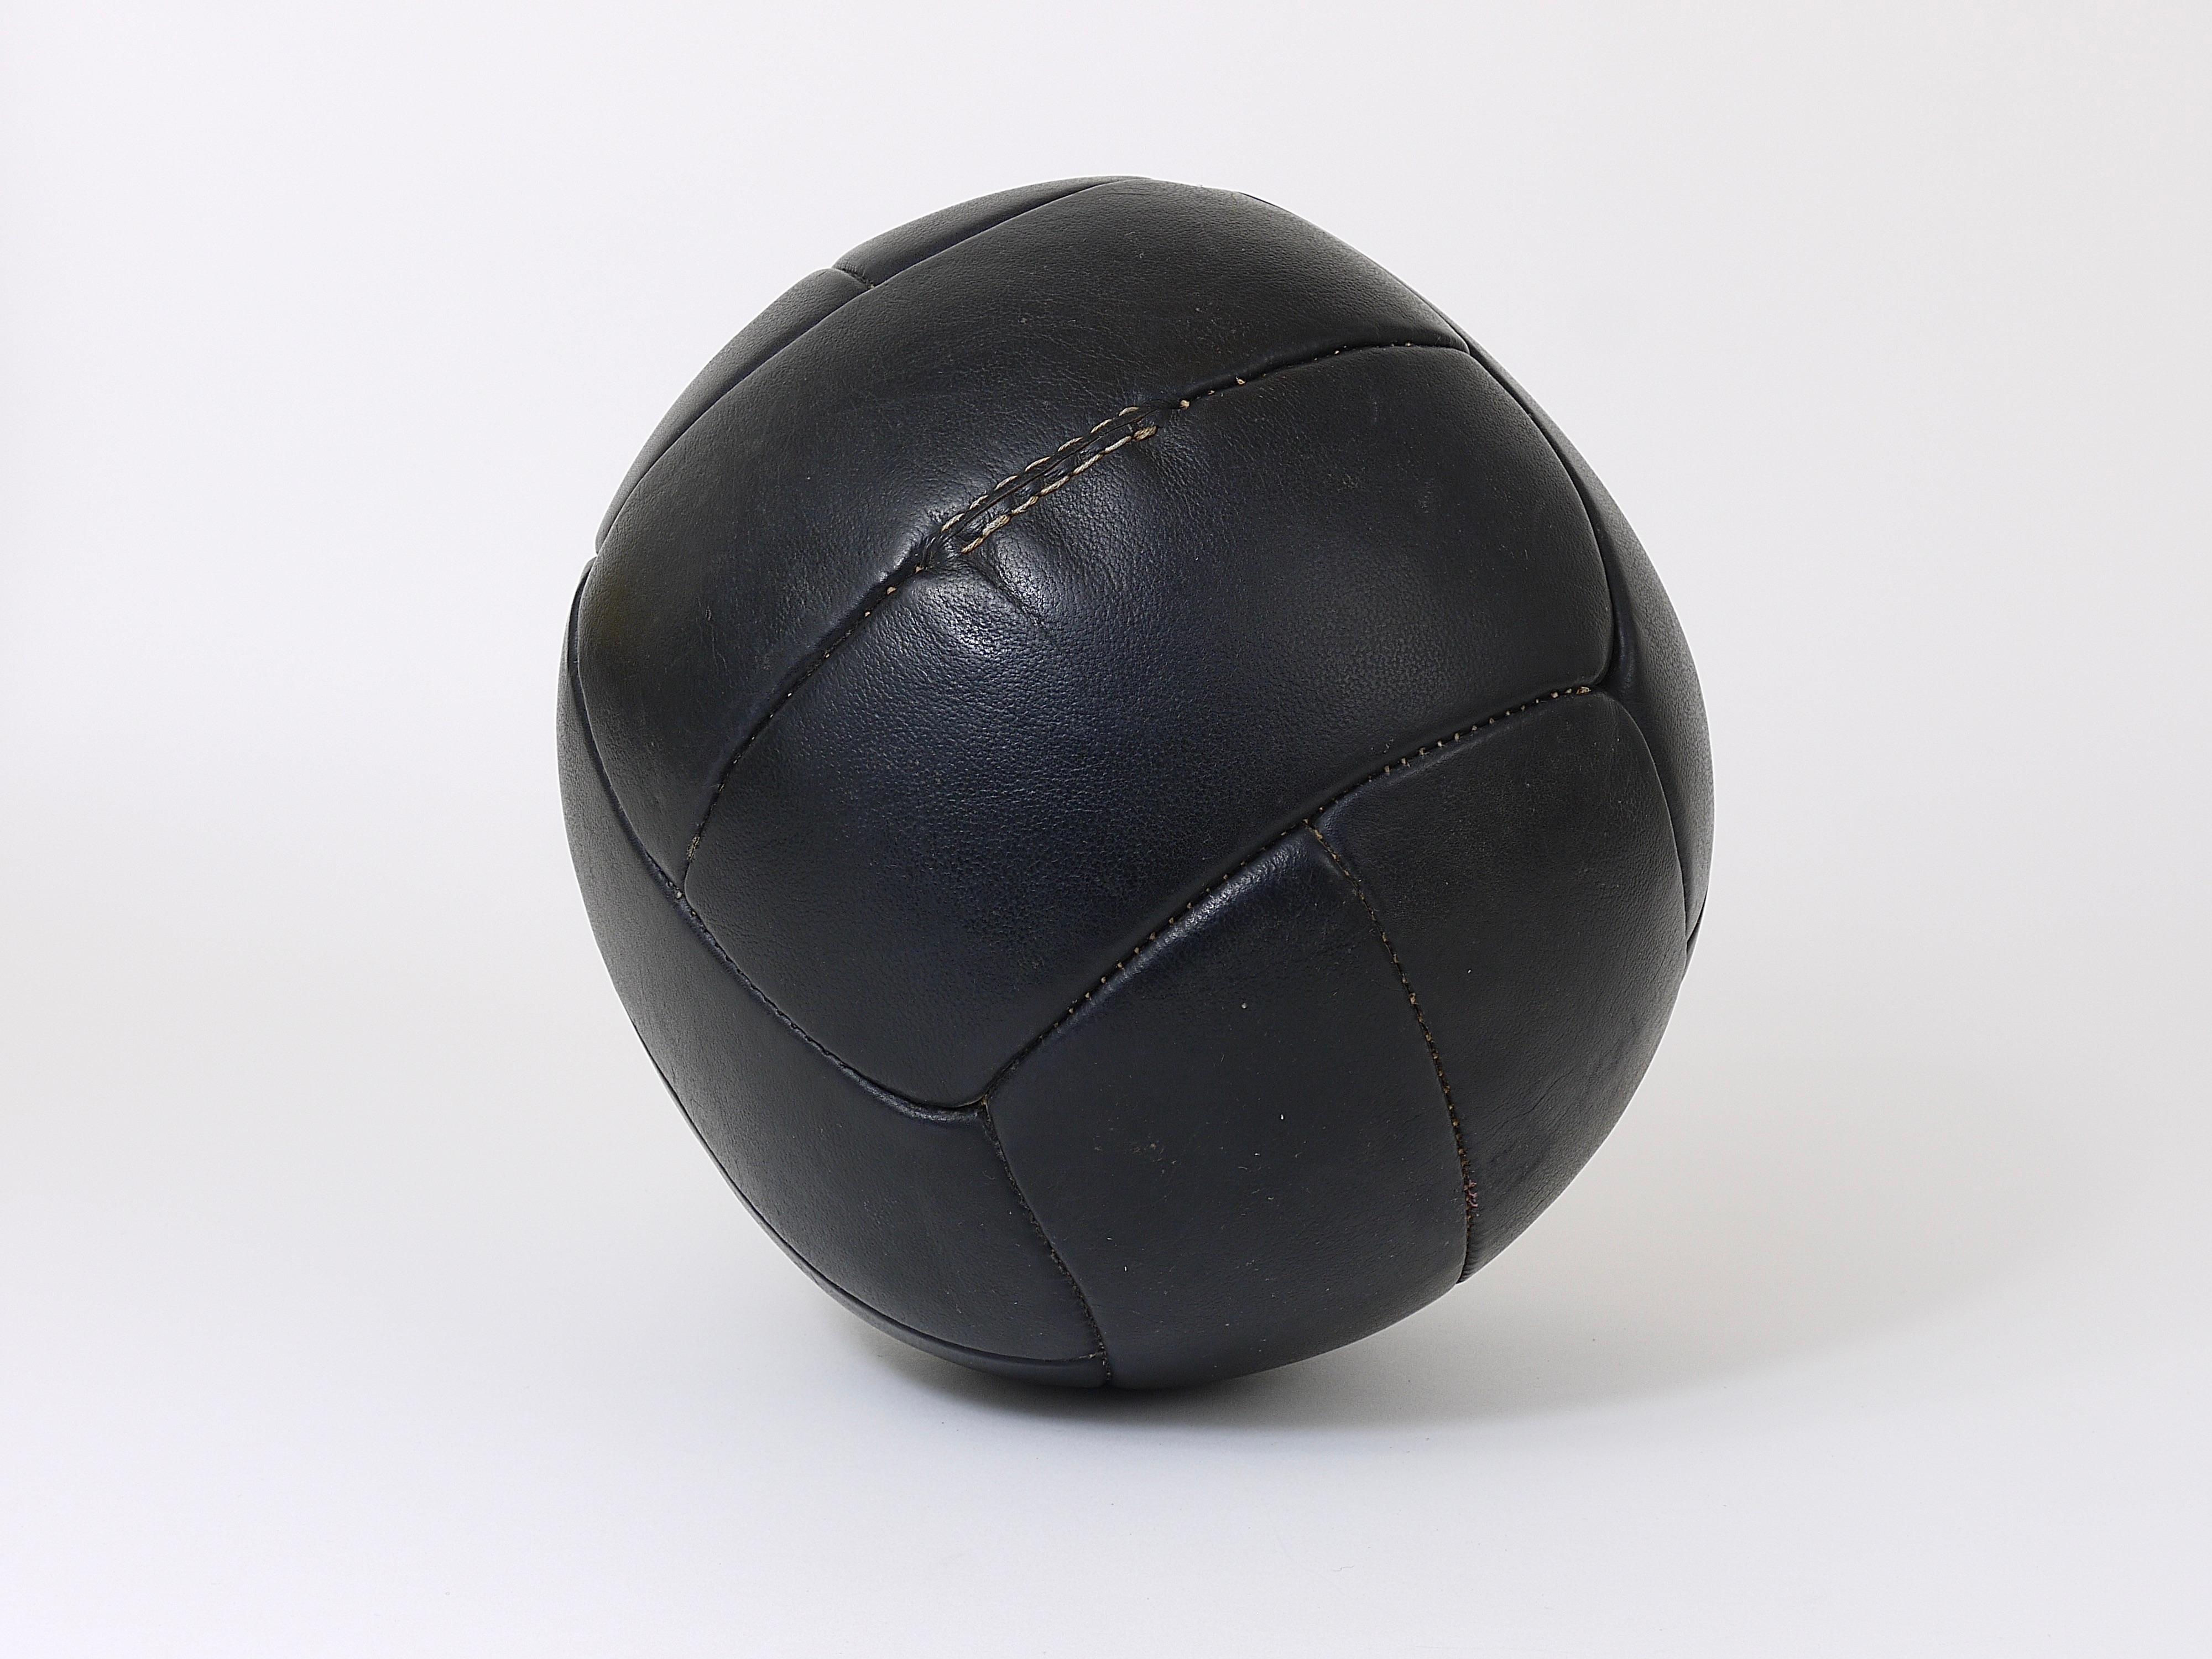 A decorative handcrafted medicine ball from a Czech gym, dated circa 1930s. Made of thick black saddle leather in good vintage condition with charming patina. Cleaned and treated with special leather care. Measure: Diameter 11 inches, weight 3 kg /